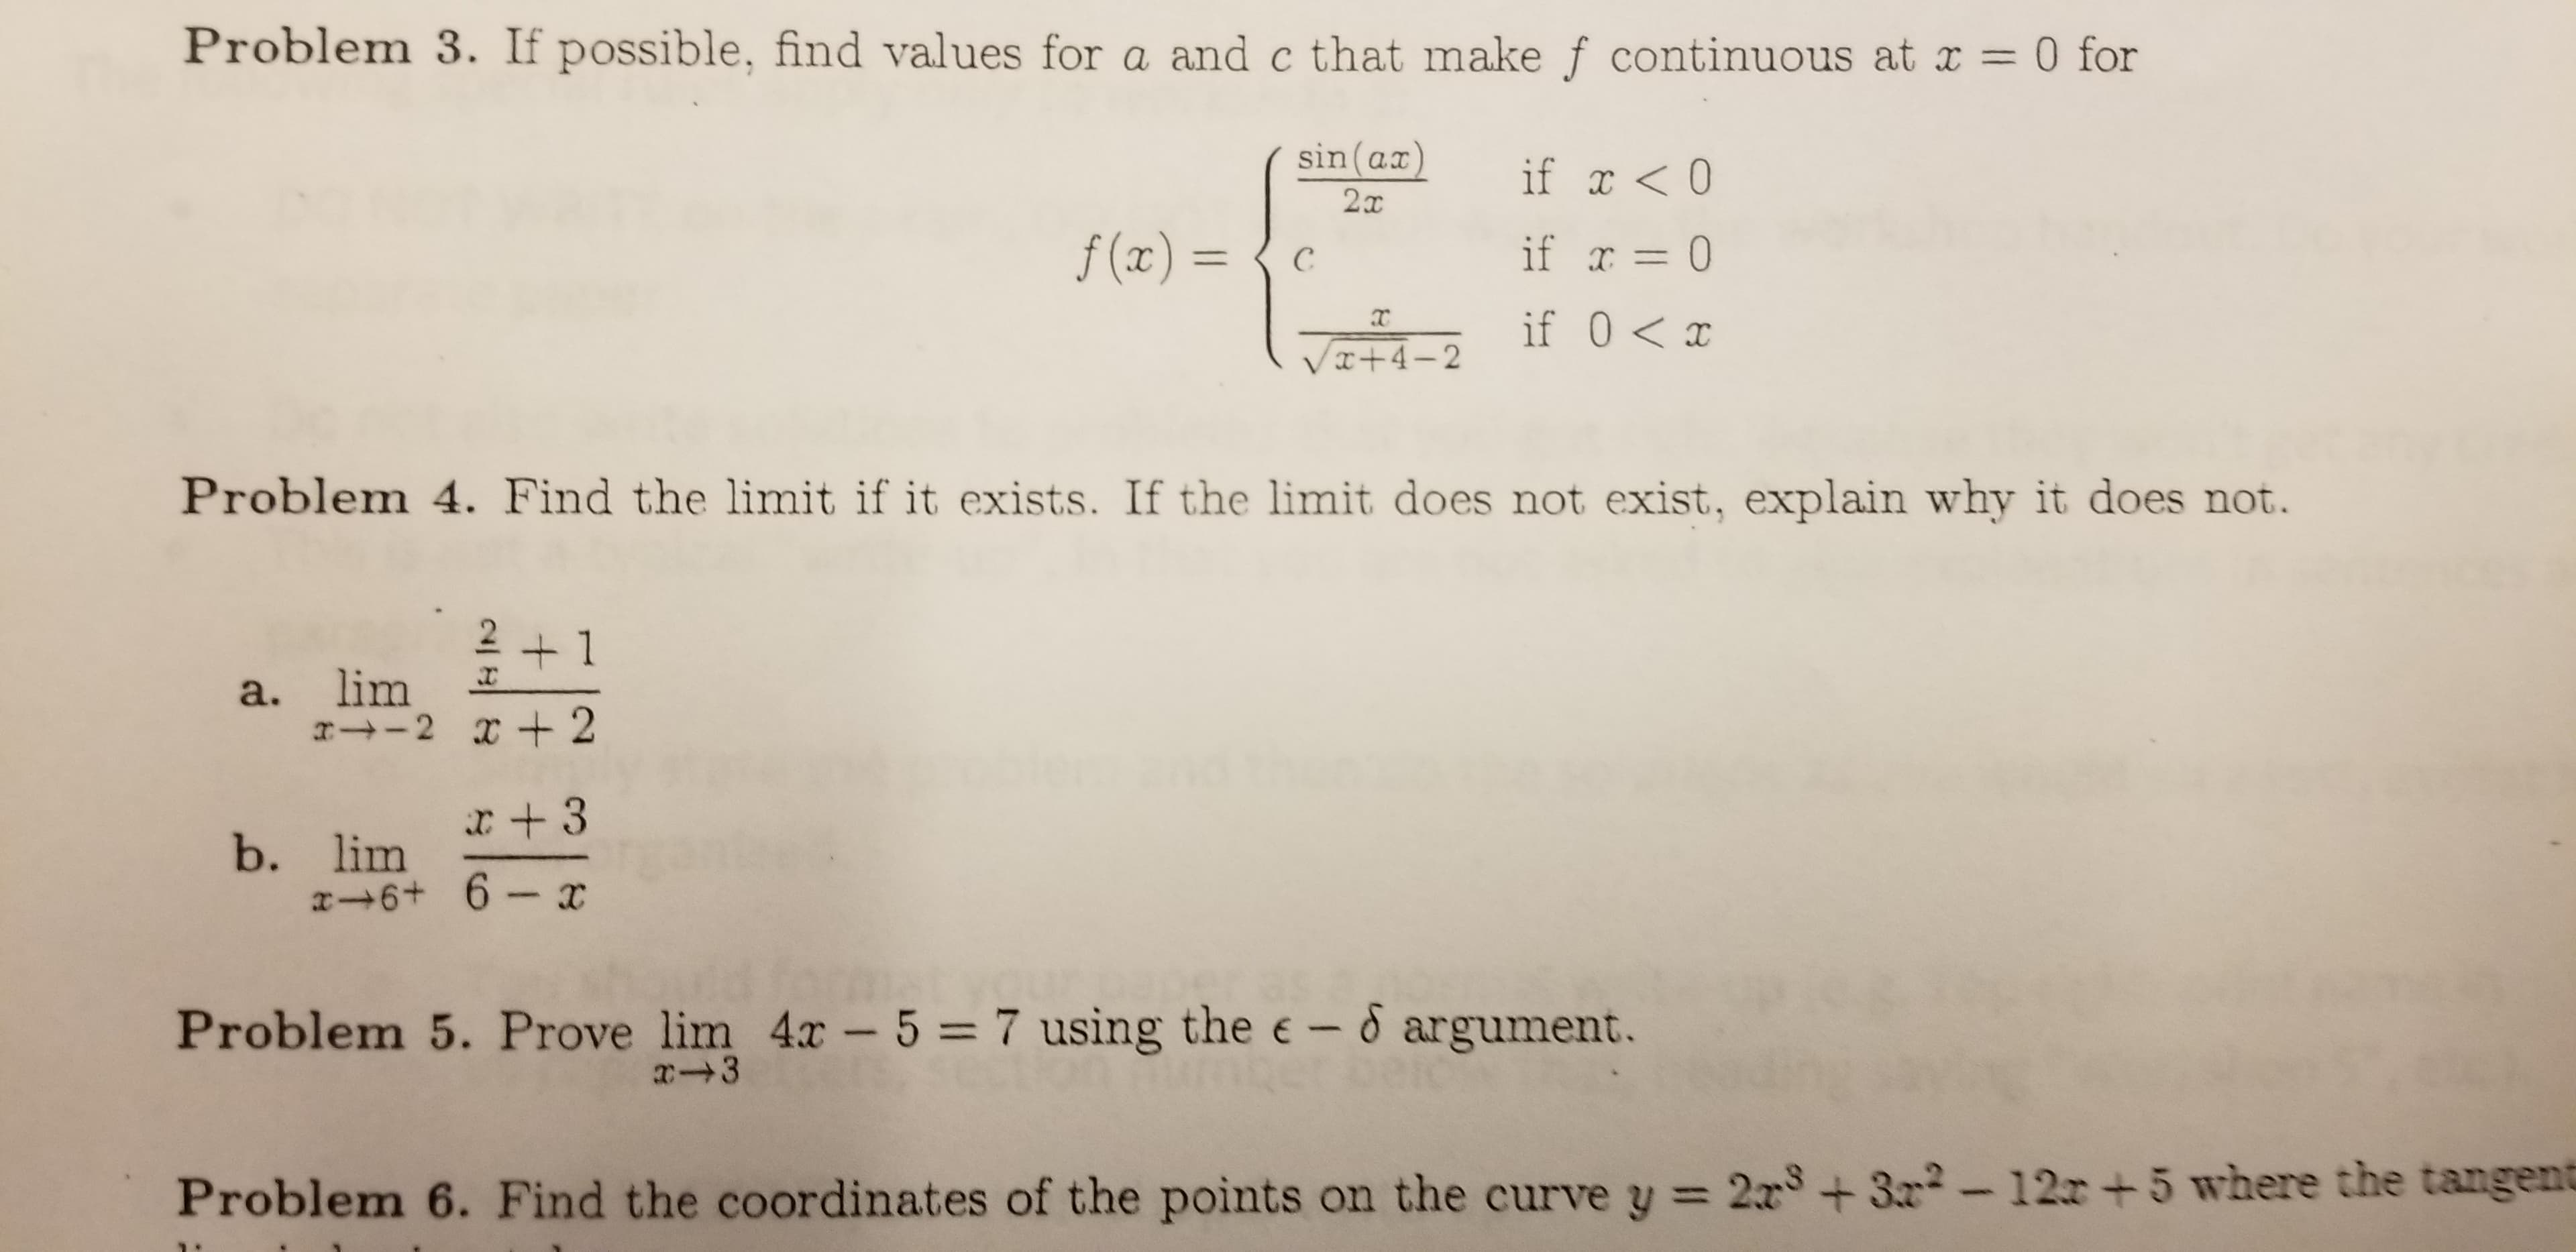 Problem 3. If possible, find values for a and c that make f continuous at x
0 for
sin (ax)
if <0
f(x) =
if r 0
C
if 0 x
VI+4-2
Problem 4. Find the limit if it exists. If the limit does not exist, explain why it does not.
2 +1
a. lim
-2 2
x +3
b. lim
x 6+ 6-x
Problem 5. Prove lim 4x - 5 = 7 using the e-6 argument.
x 3
Problem 6. Find the coor dinates of the points on the curve y 2x +3-12r +5 where the tangent
4
에비 &
